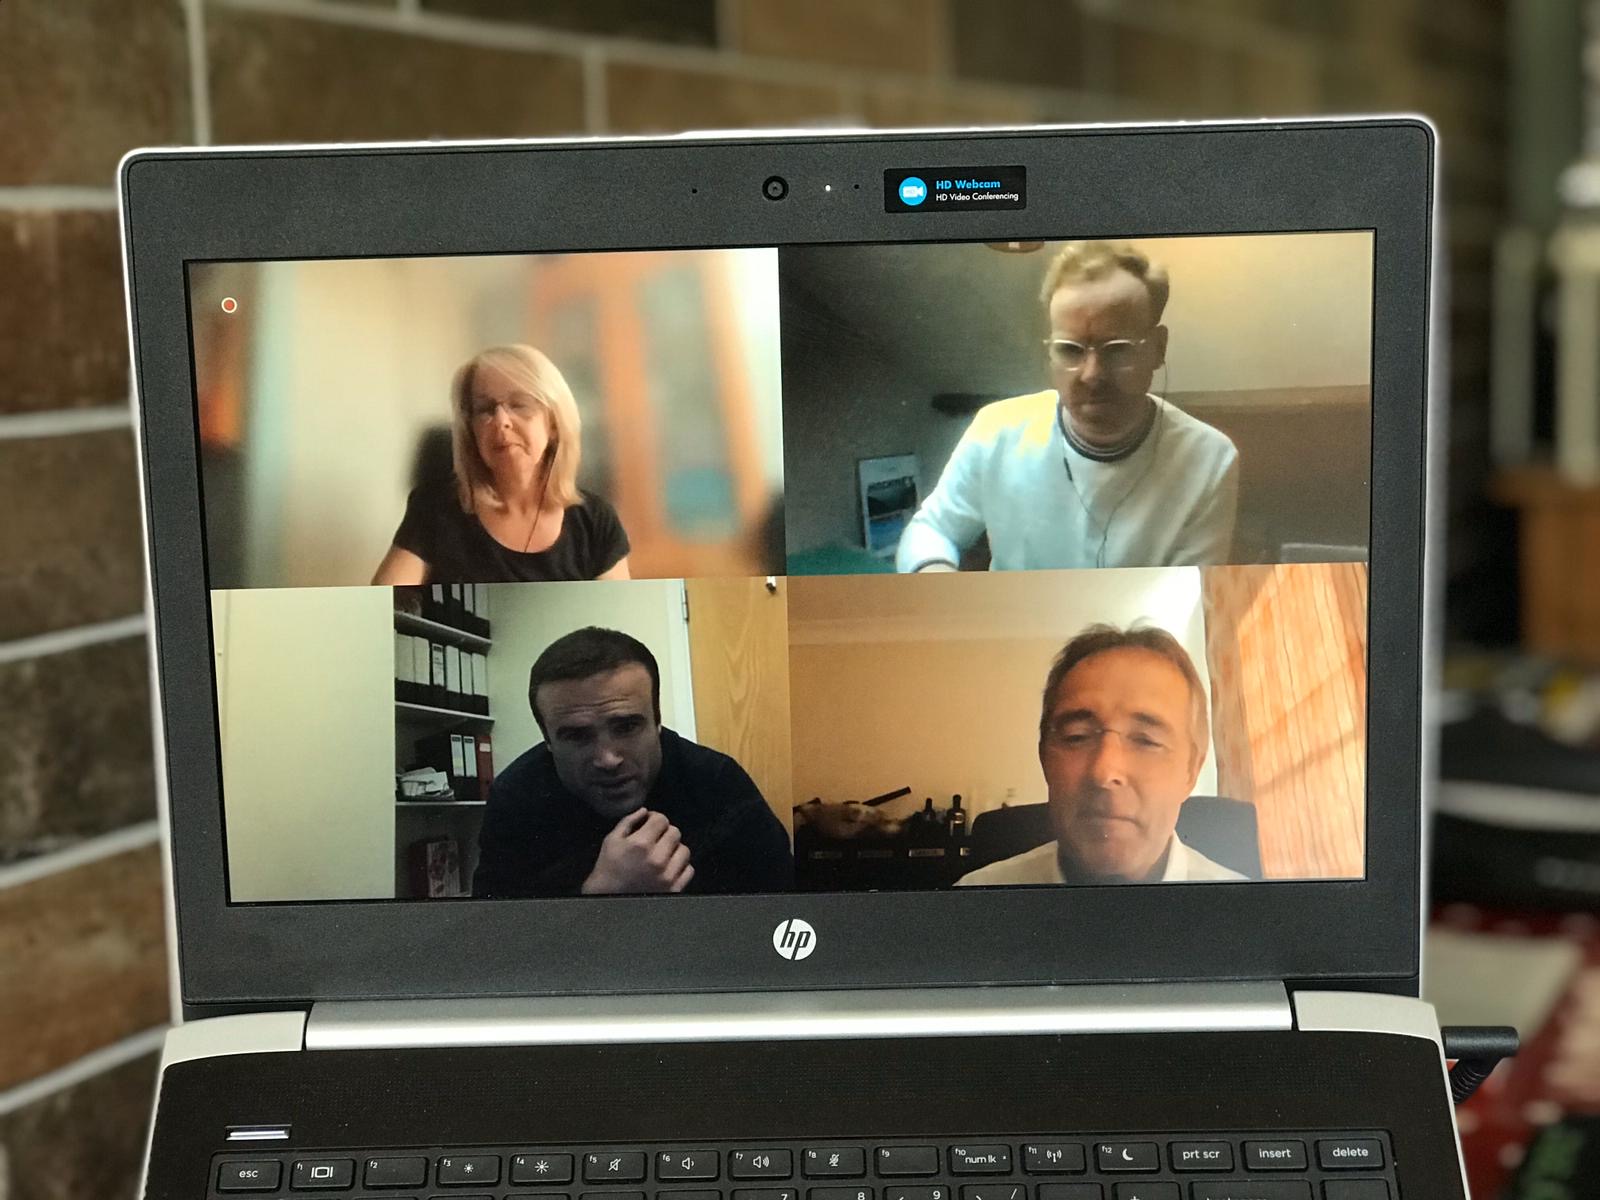 Picture of 4 people in an online meeting 